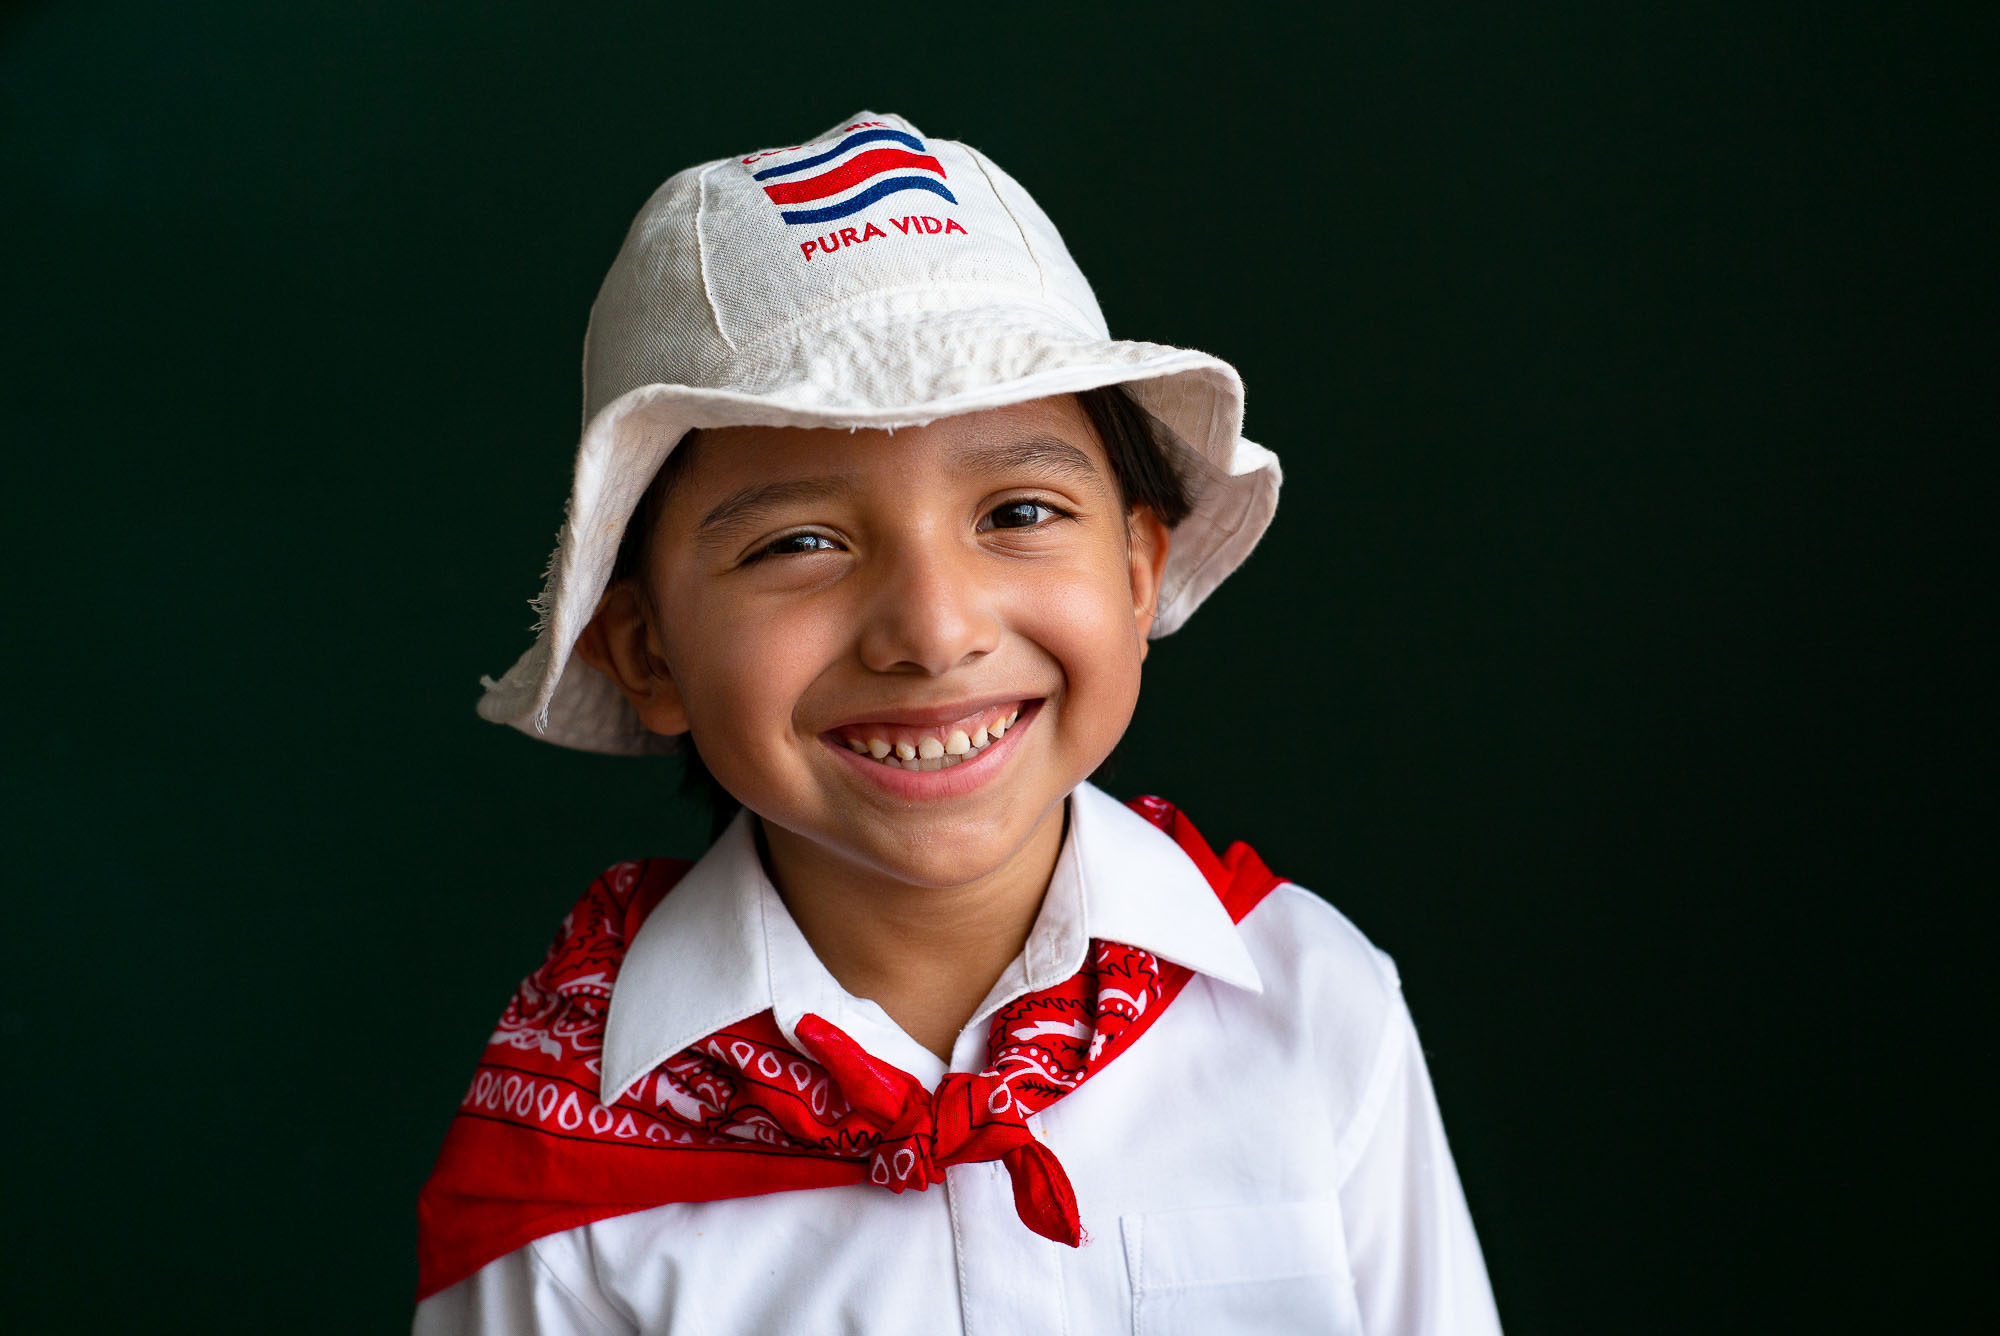 Little boy in campesino outfit (traditional Costa Rican clothing)